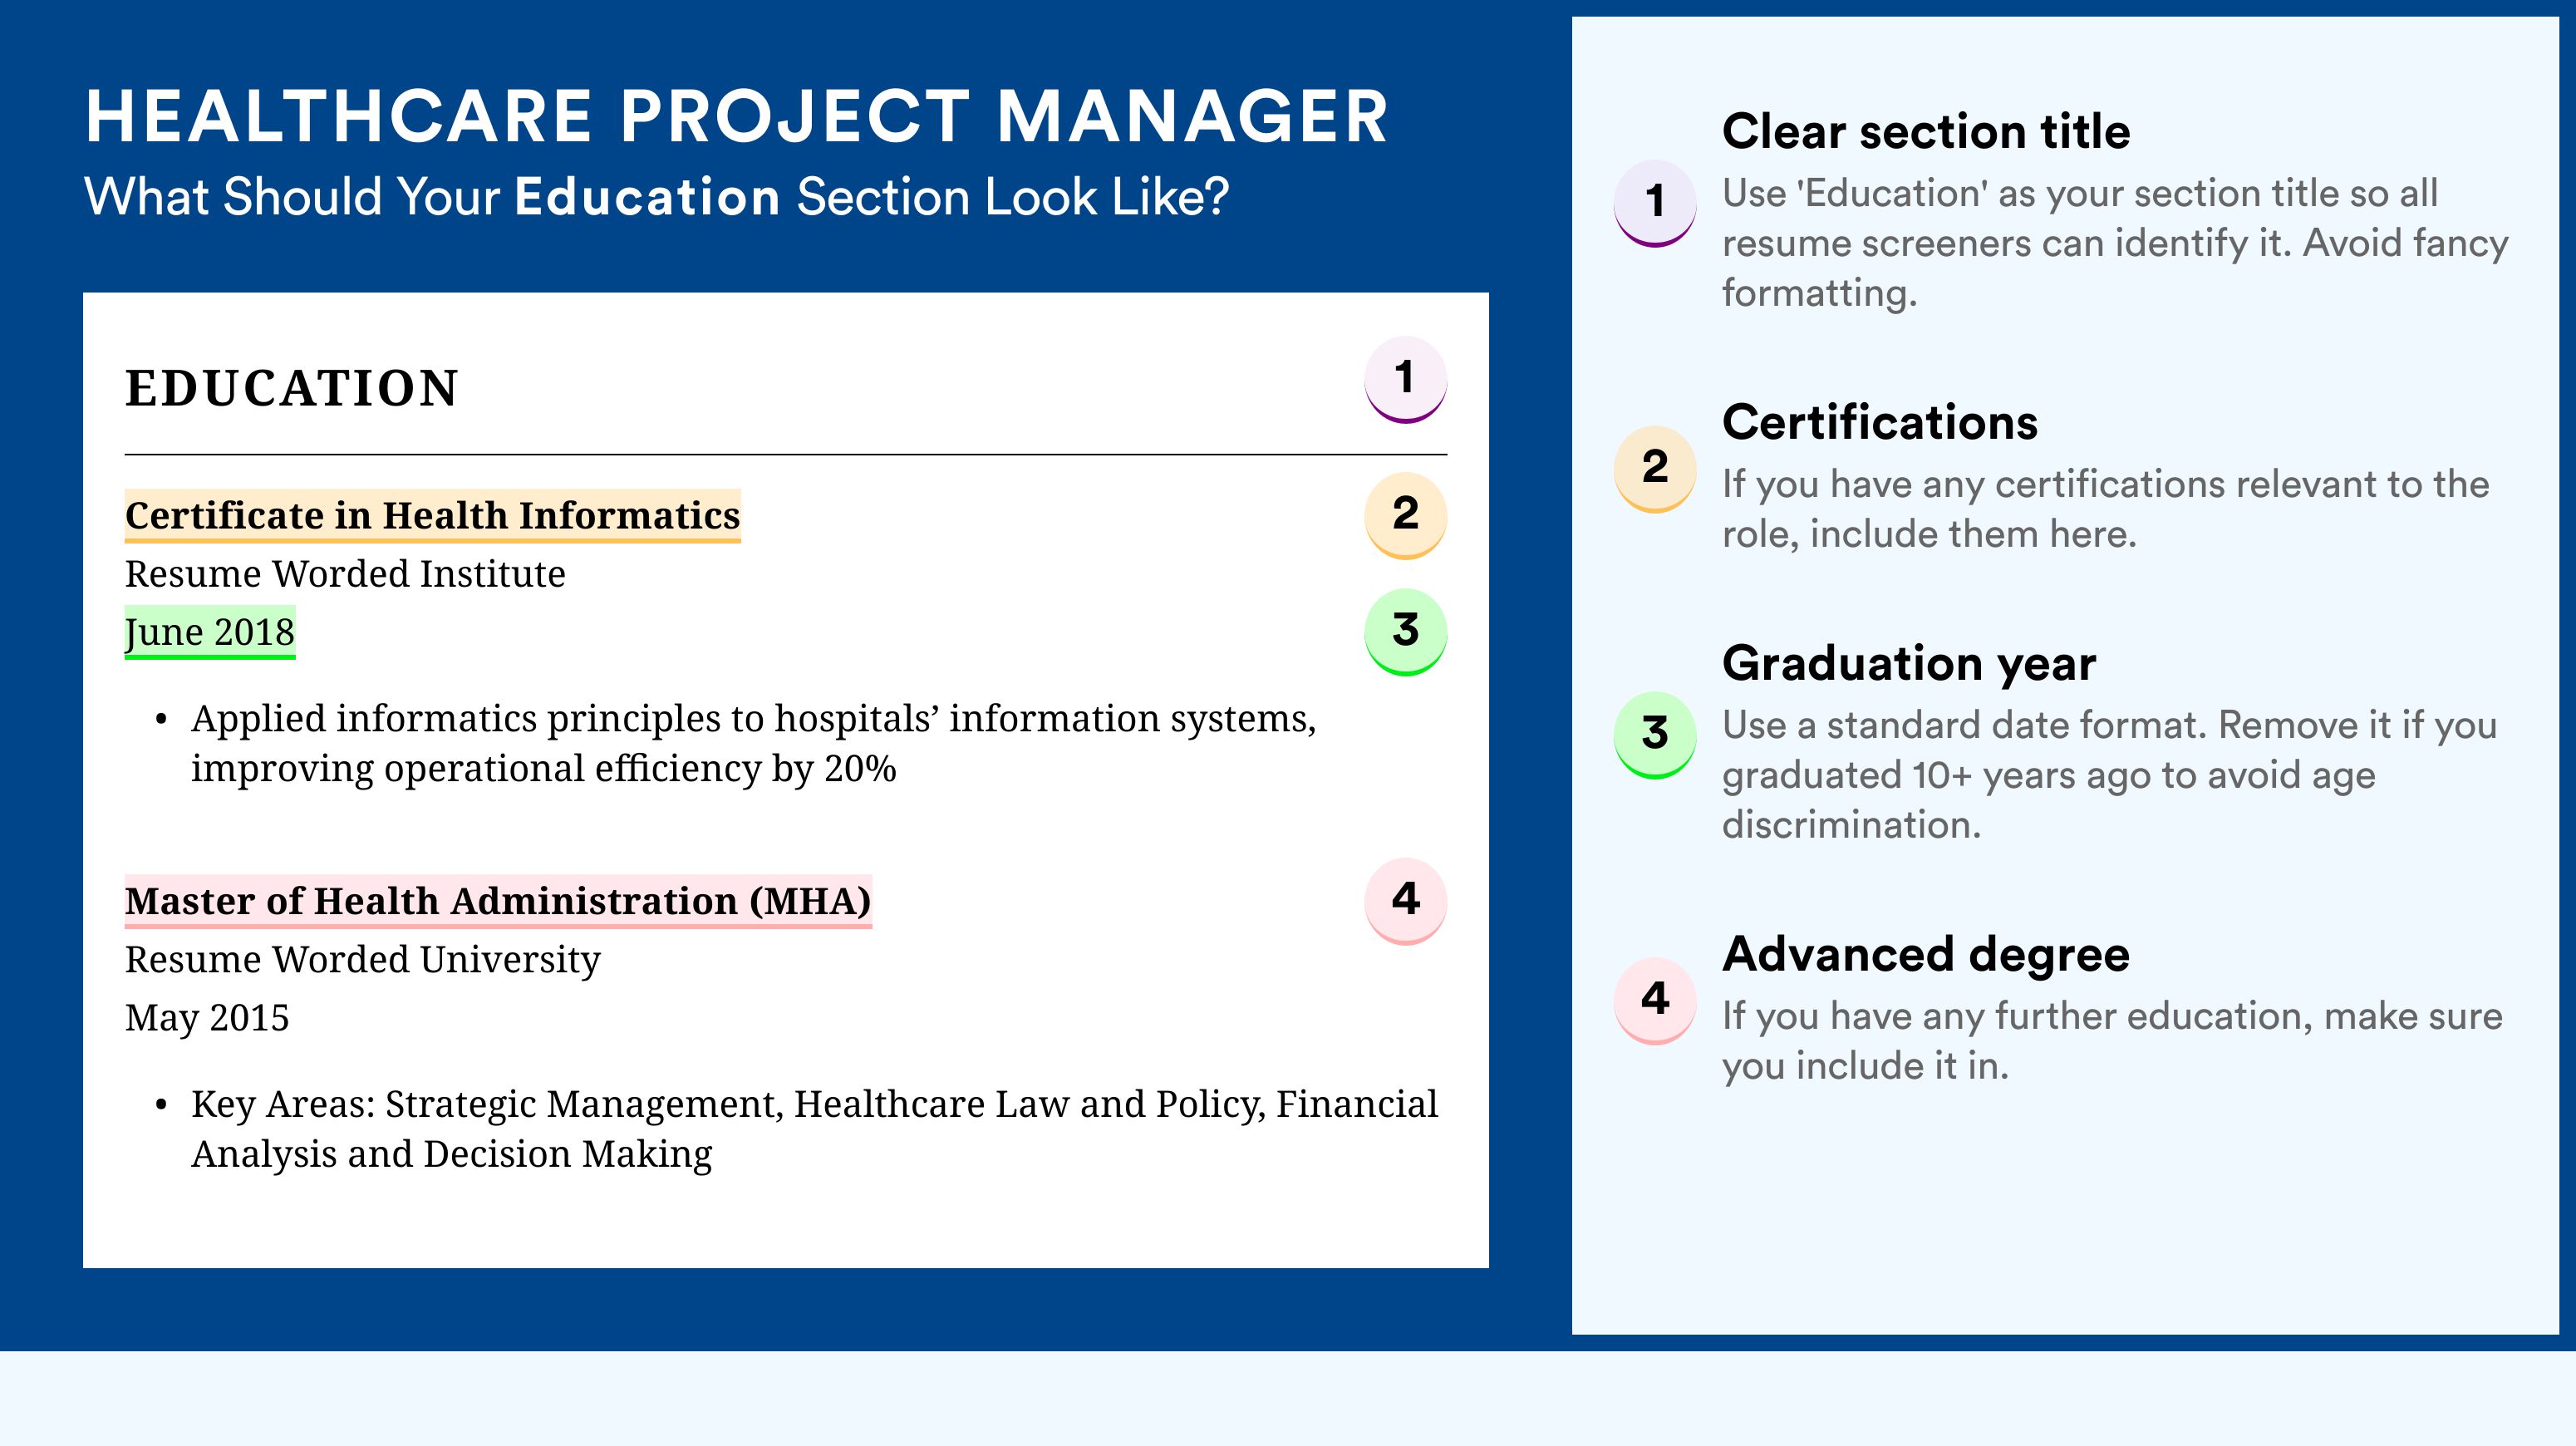 How To Write An Education Section - Healthcare Project Manager Roles